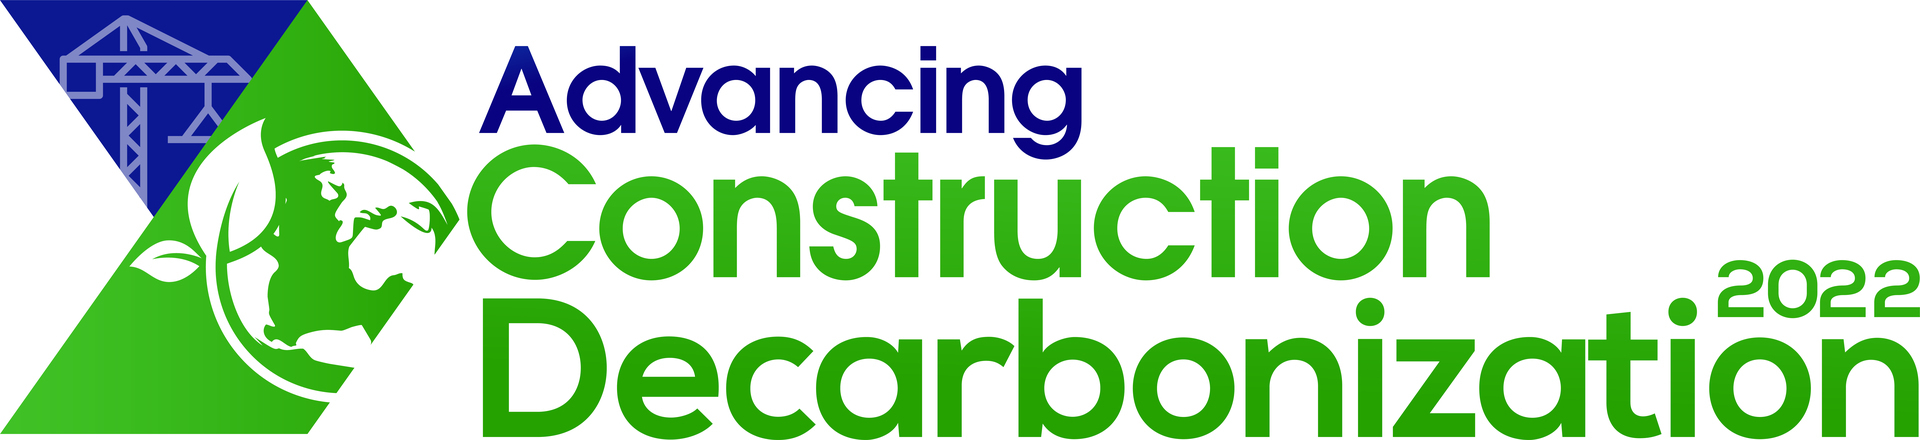 Advancing Construction Decarbonization 2022 Conference | July 19-21, Chicago, IL